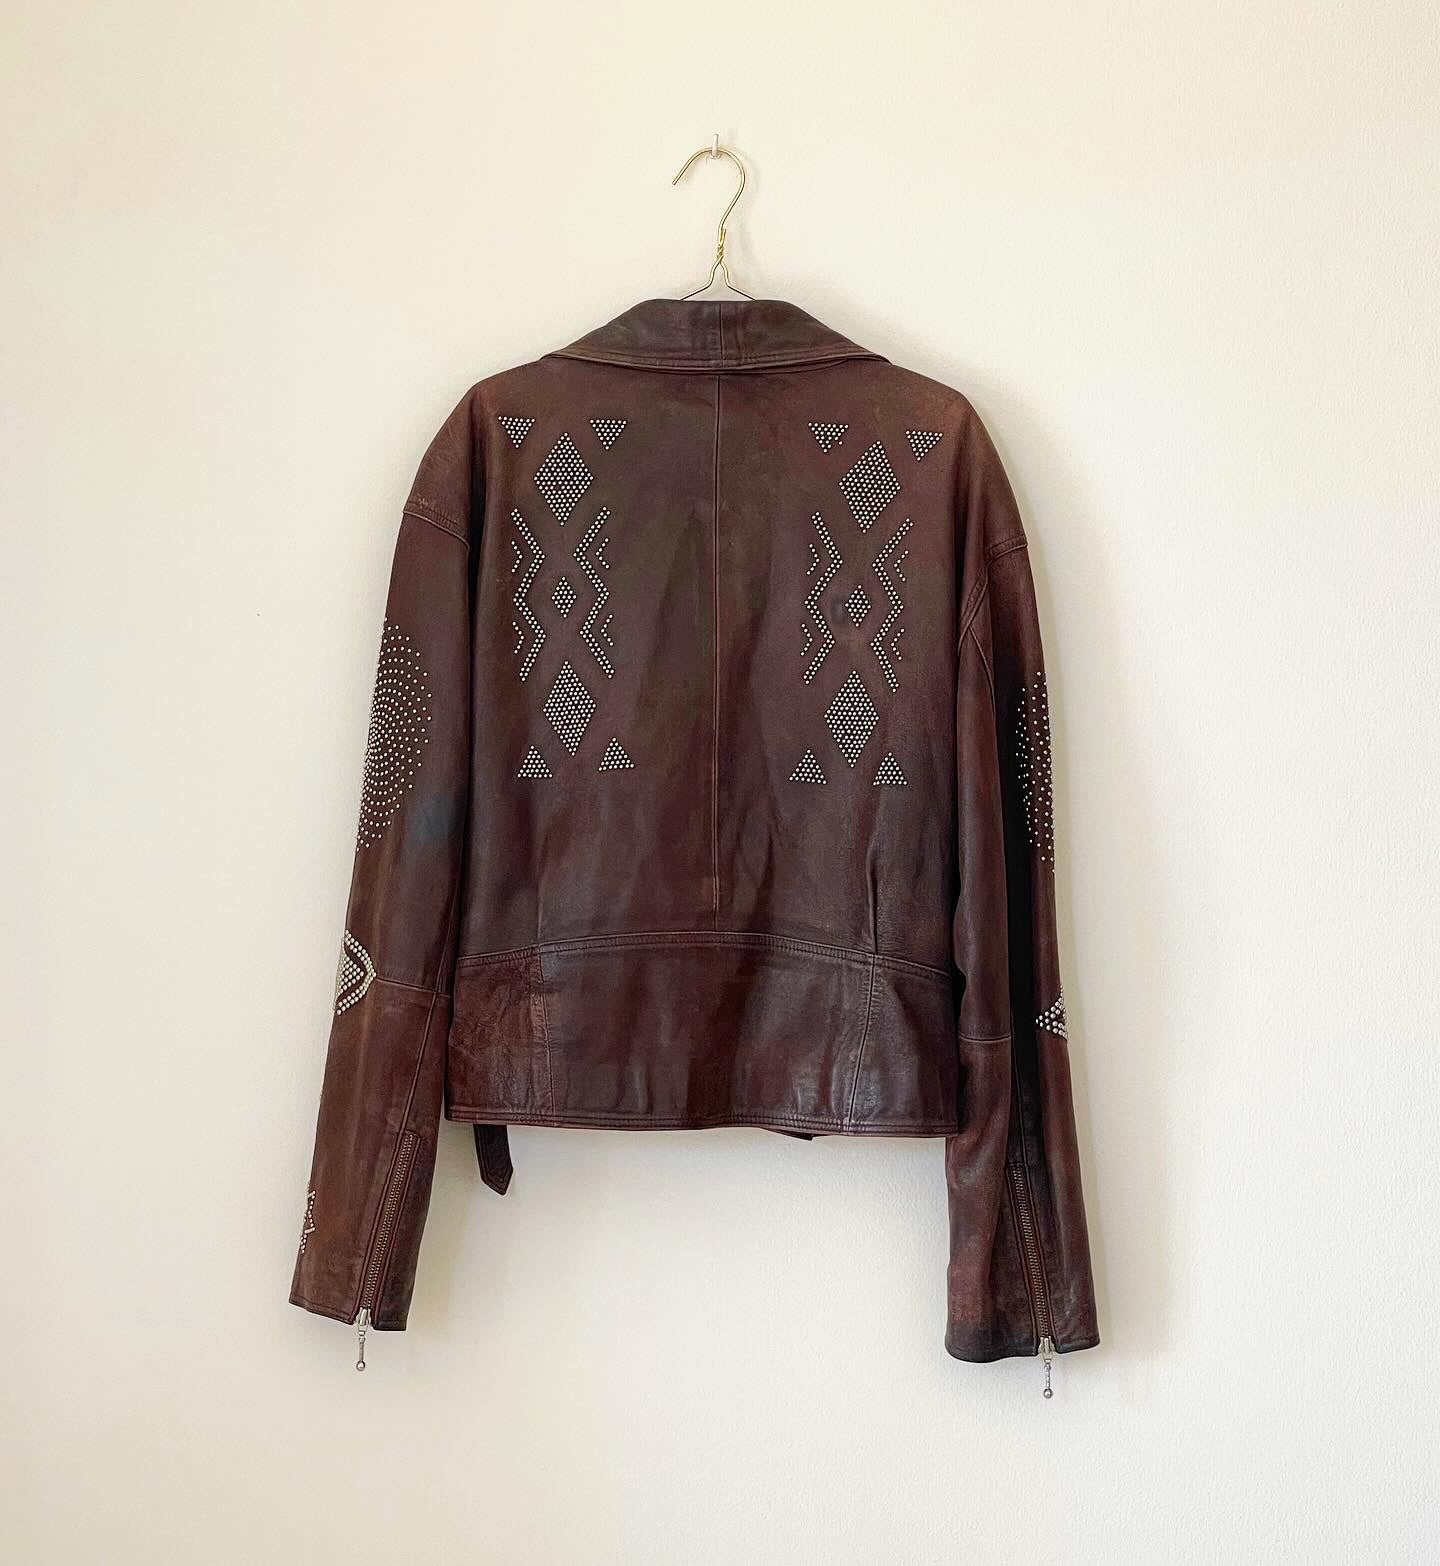 Gorgeous vintage leather jacket with decoration